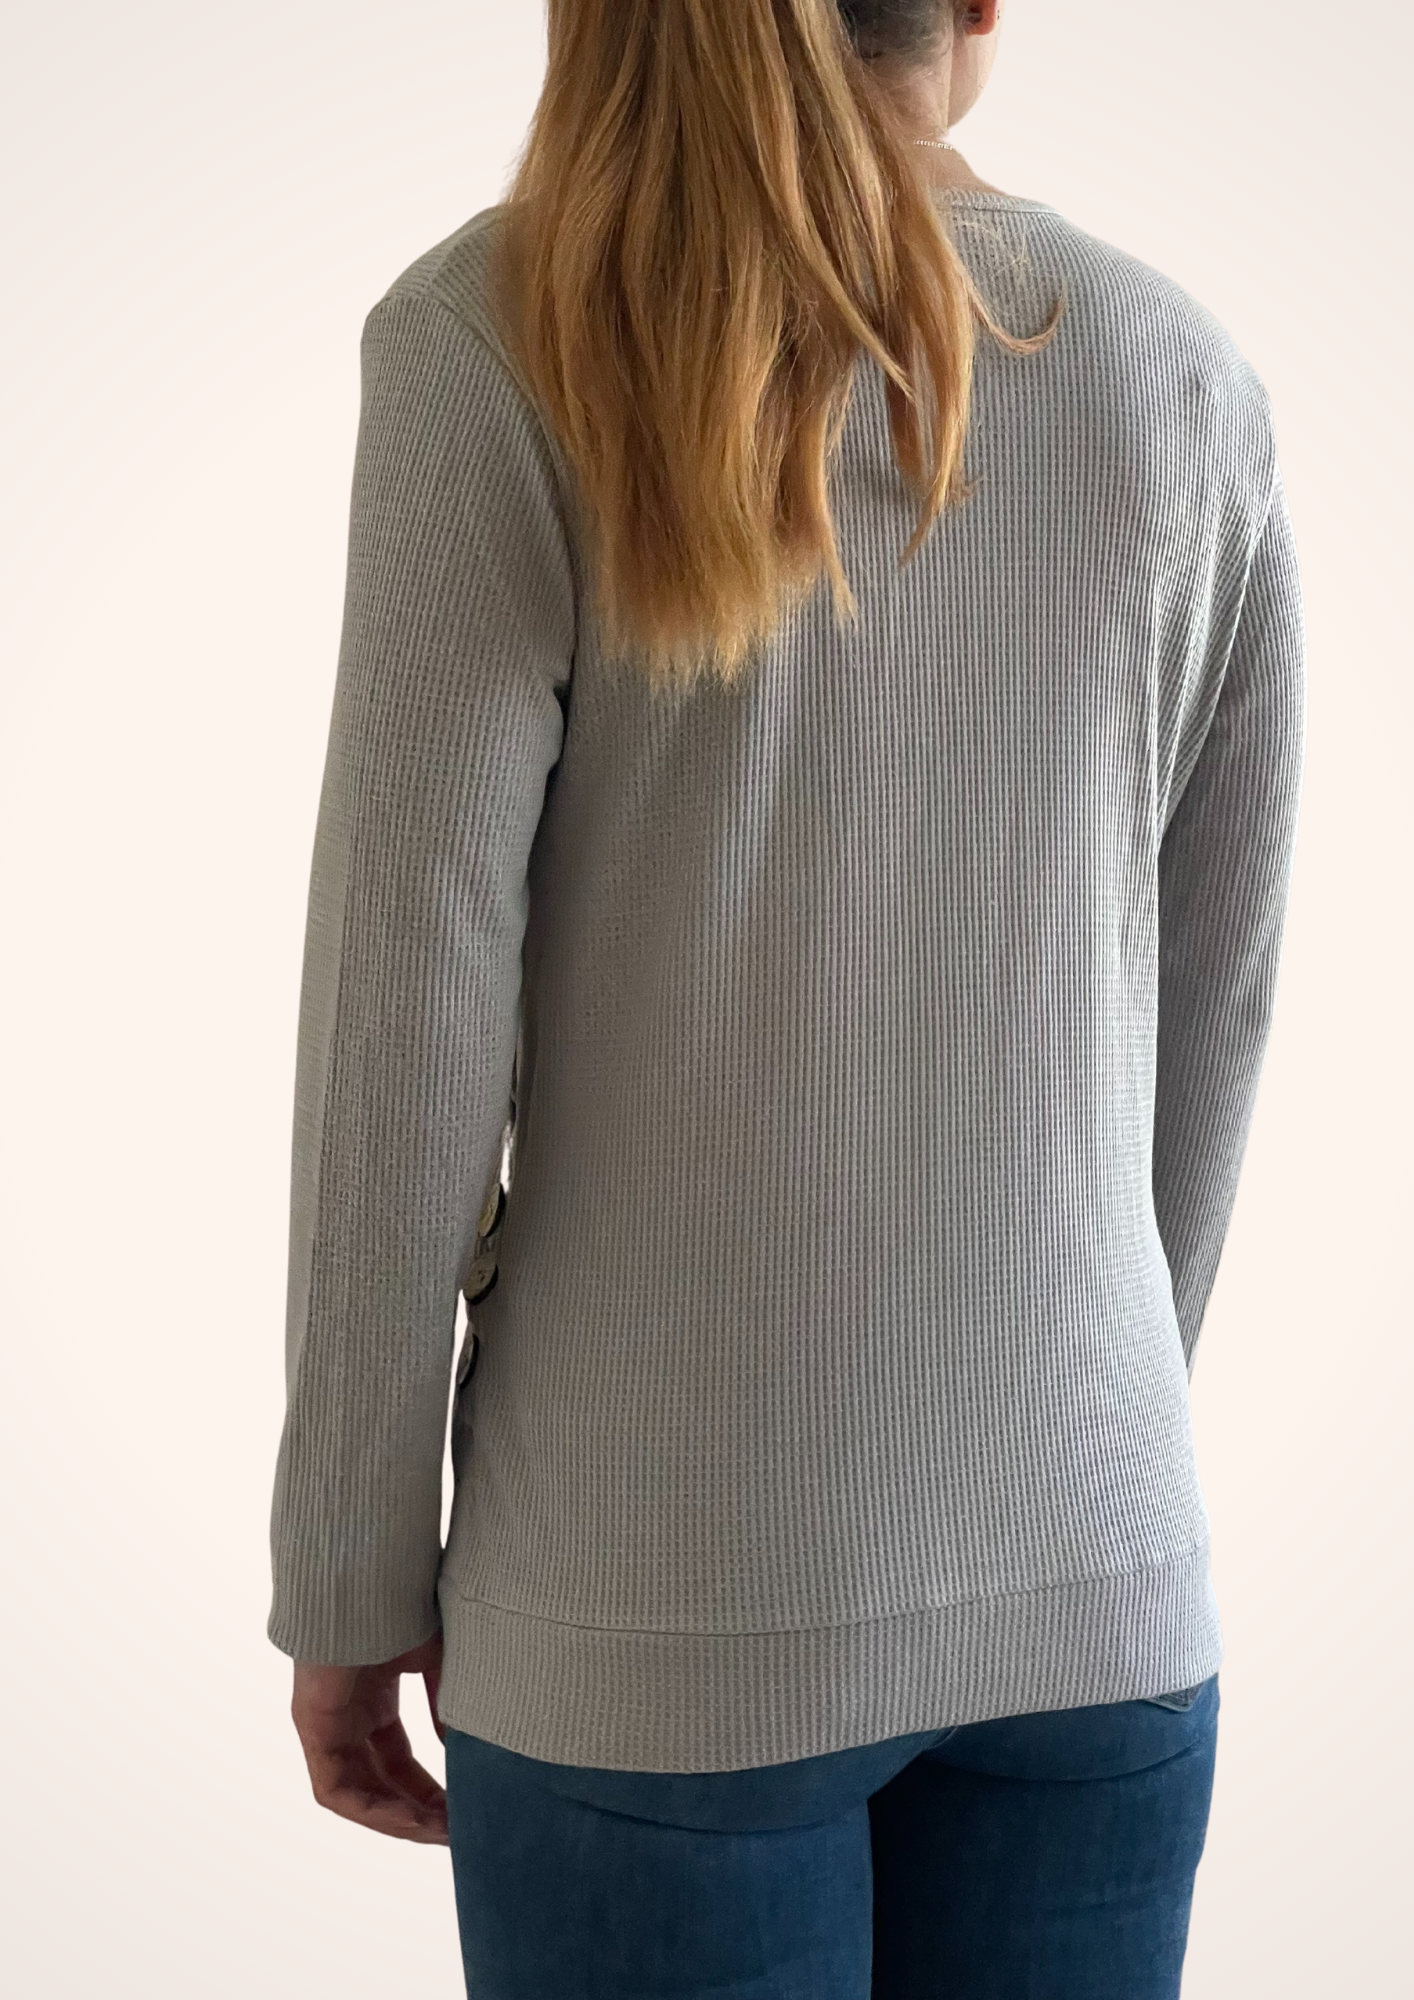 Plunge V Neck Wrapped Long Sleeve Top in Gray